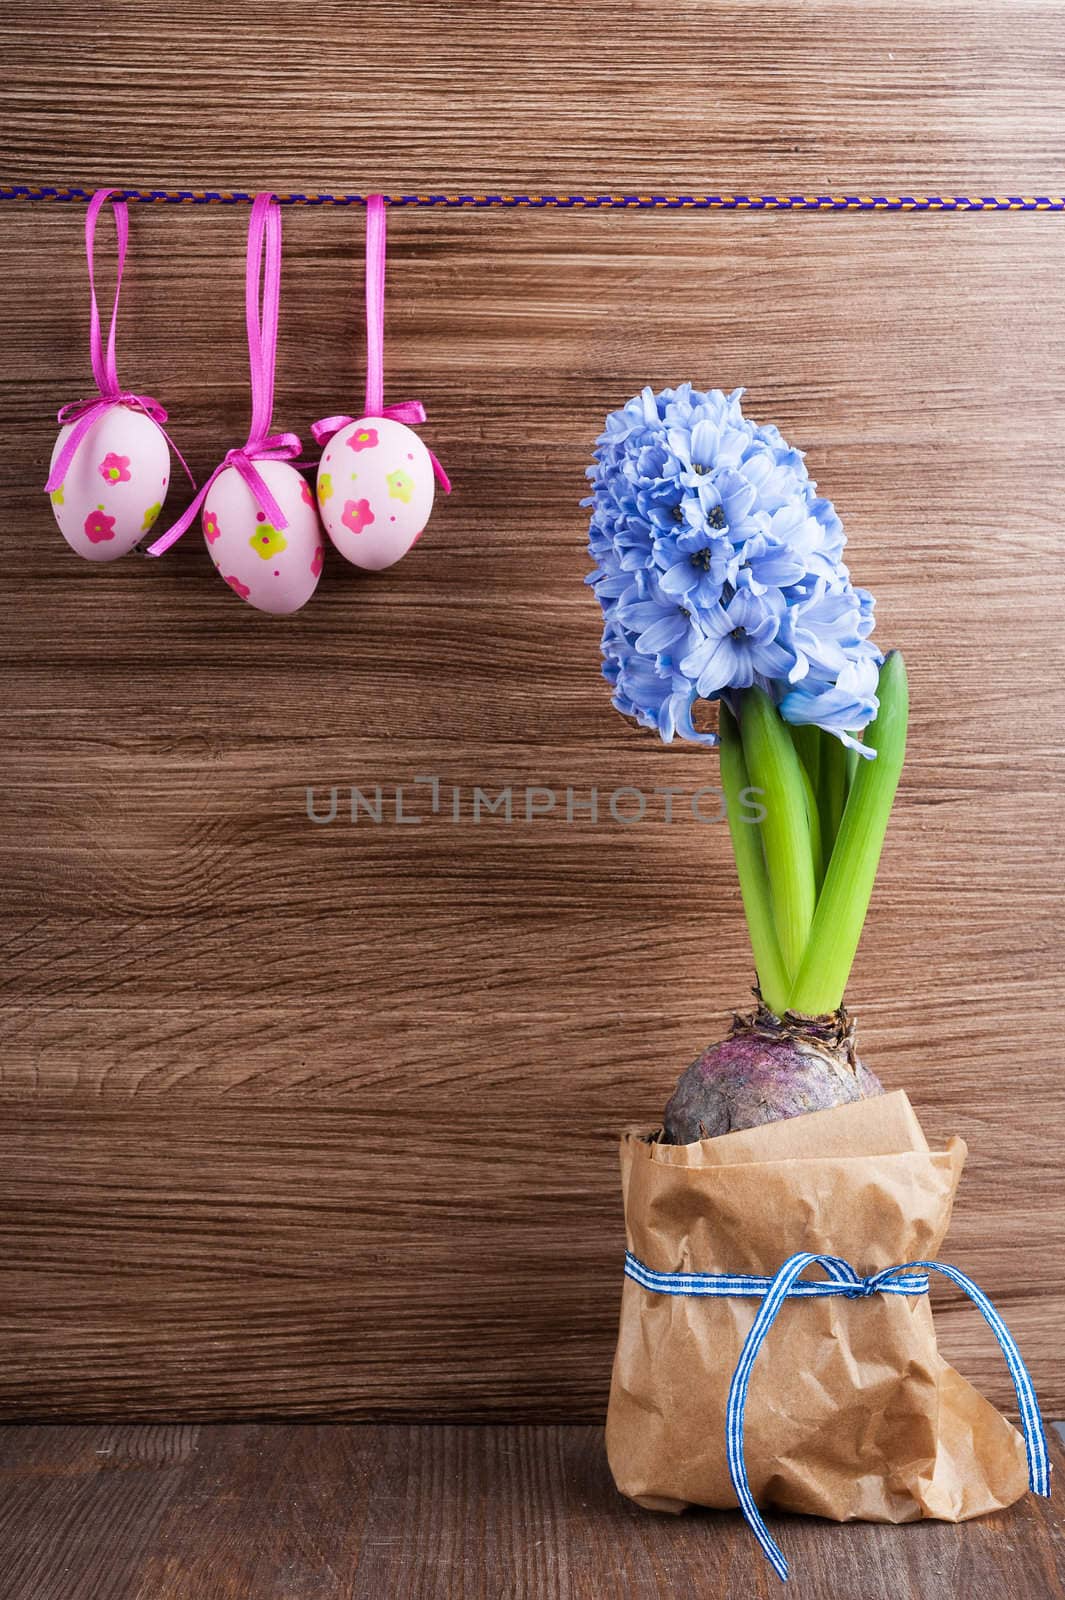 Hyacinth and eggs on a wooden surface background